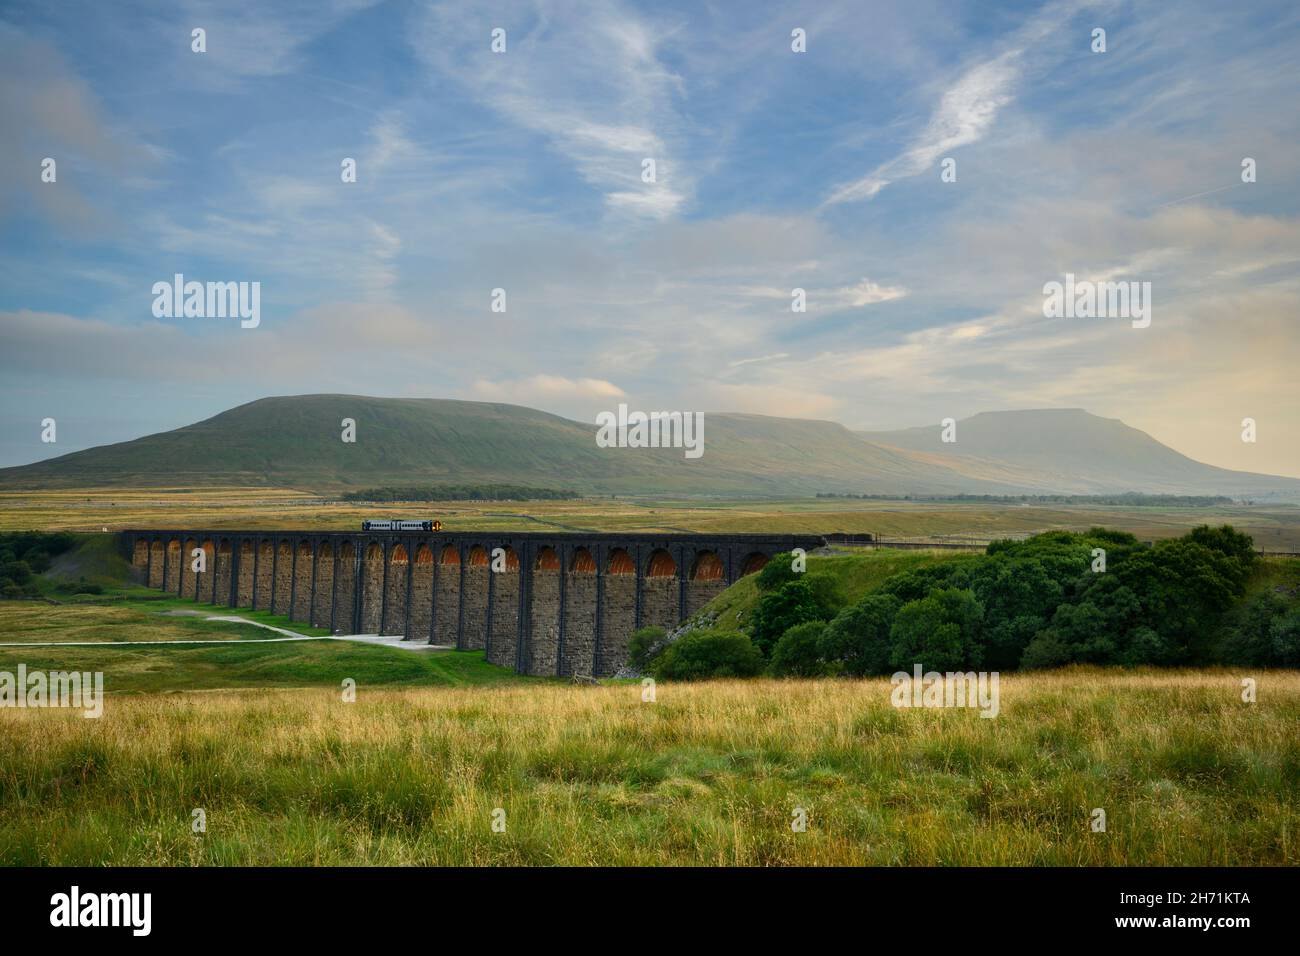 Scenic countryside valley (locomotive on landmark Ribblehead Viaduct, sunlight on arches, high hills & mountain) - North Yorkshire Dales, England UK. Stock Photo